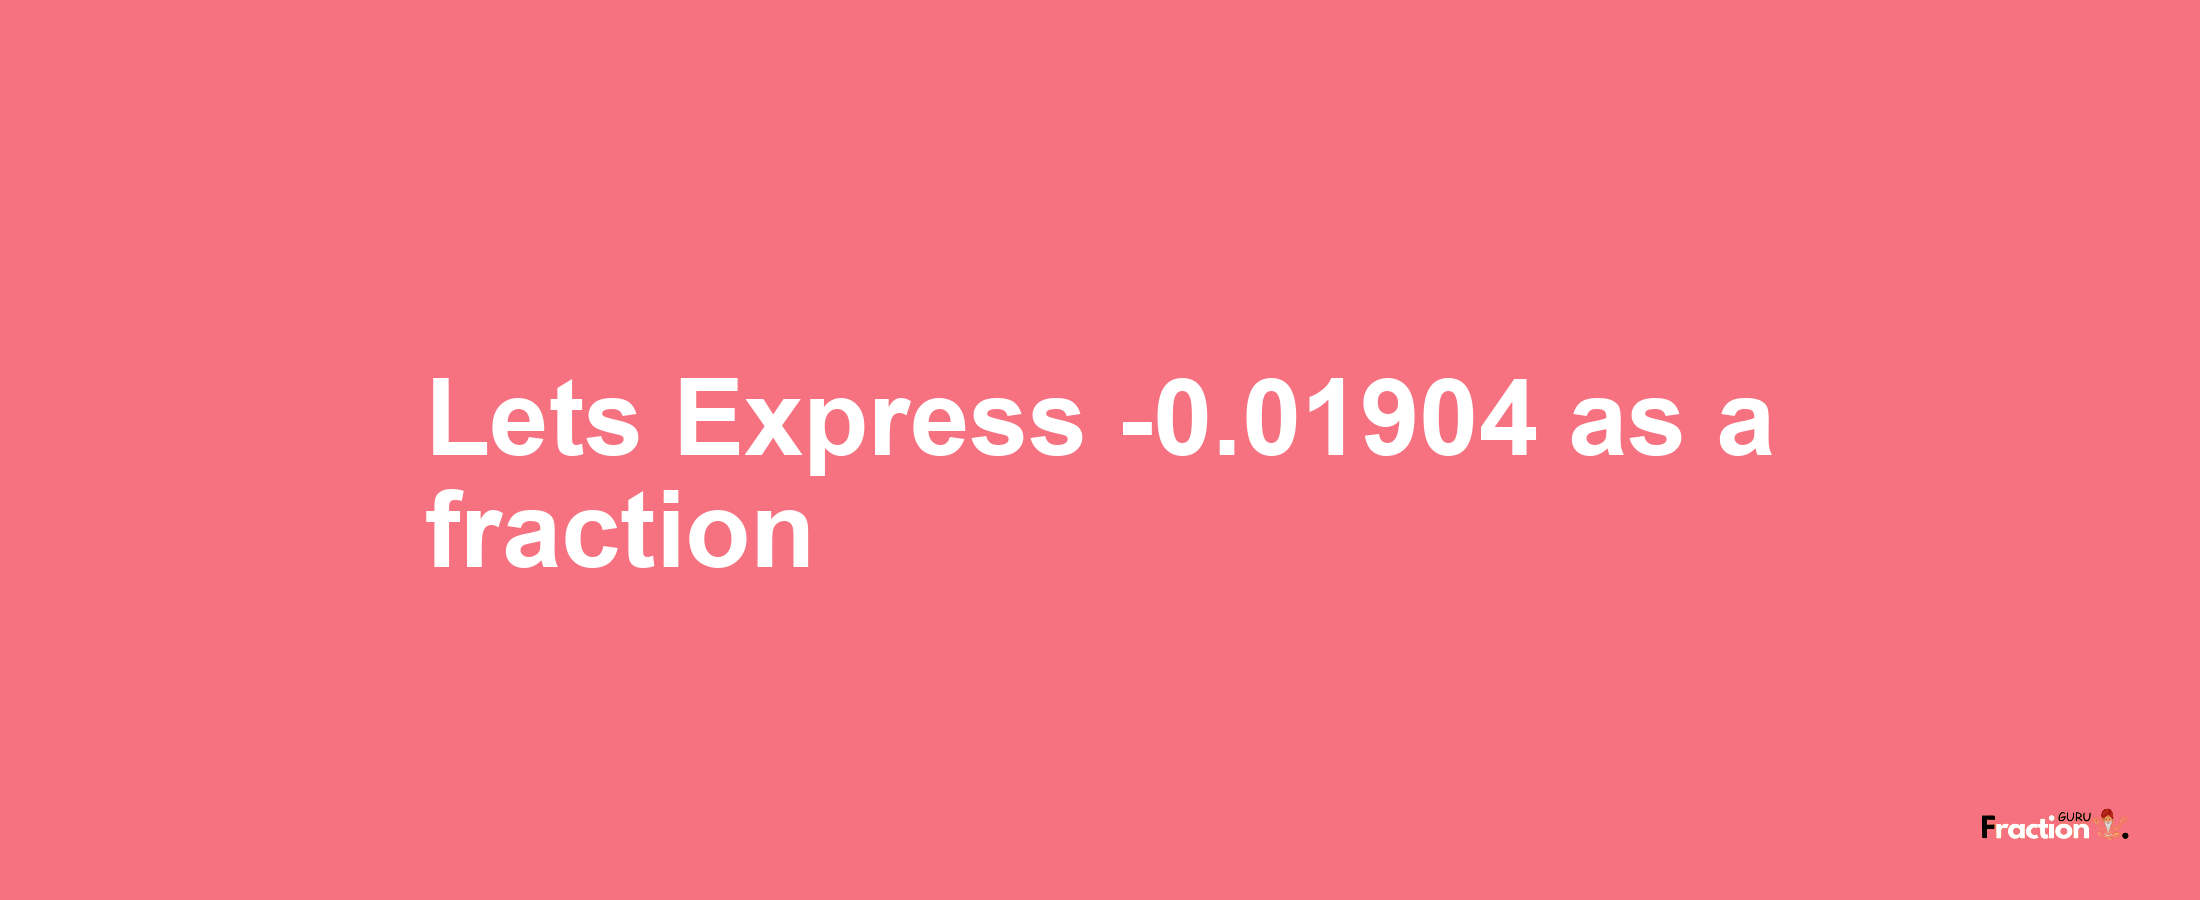 Lets Express -0.01904 as afraction